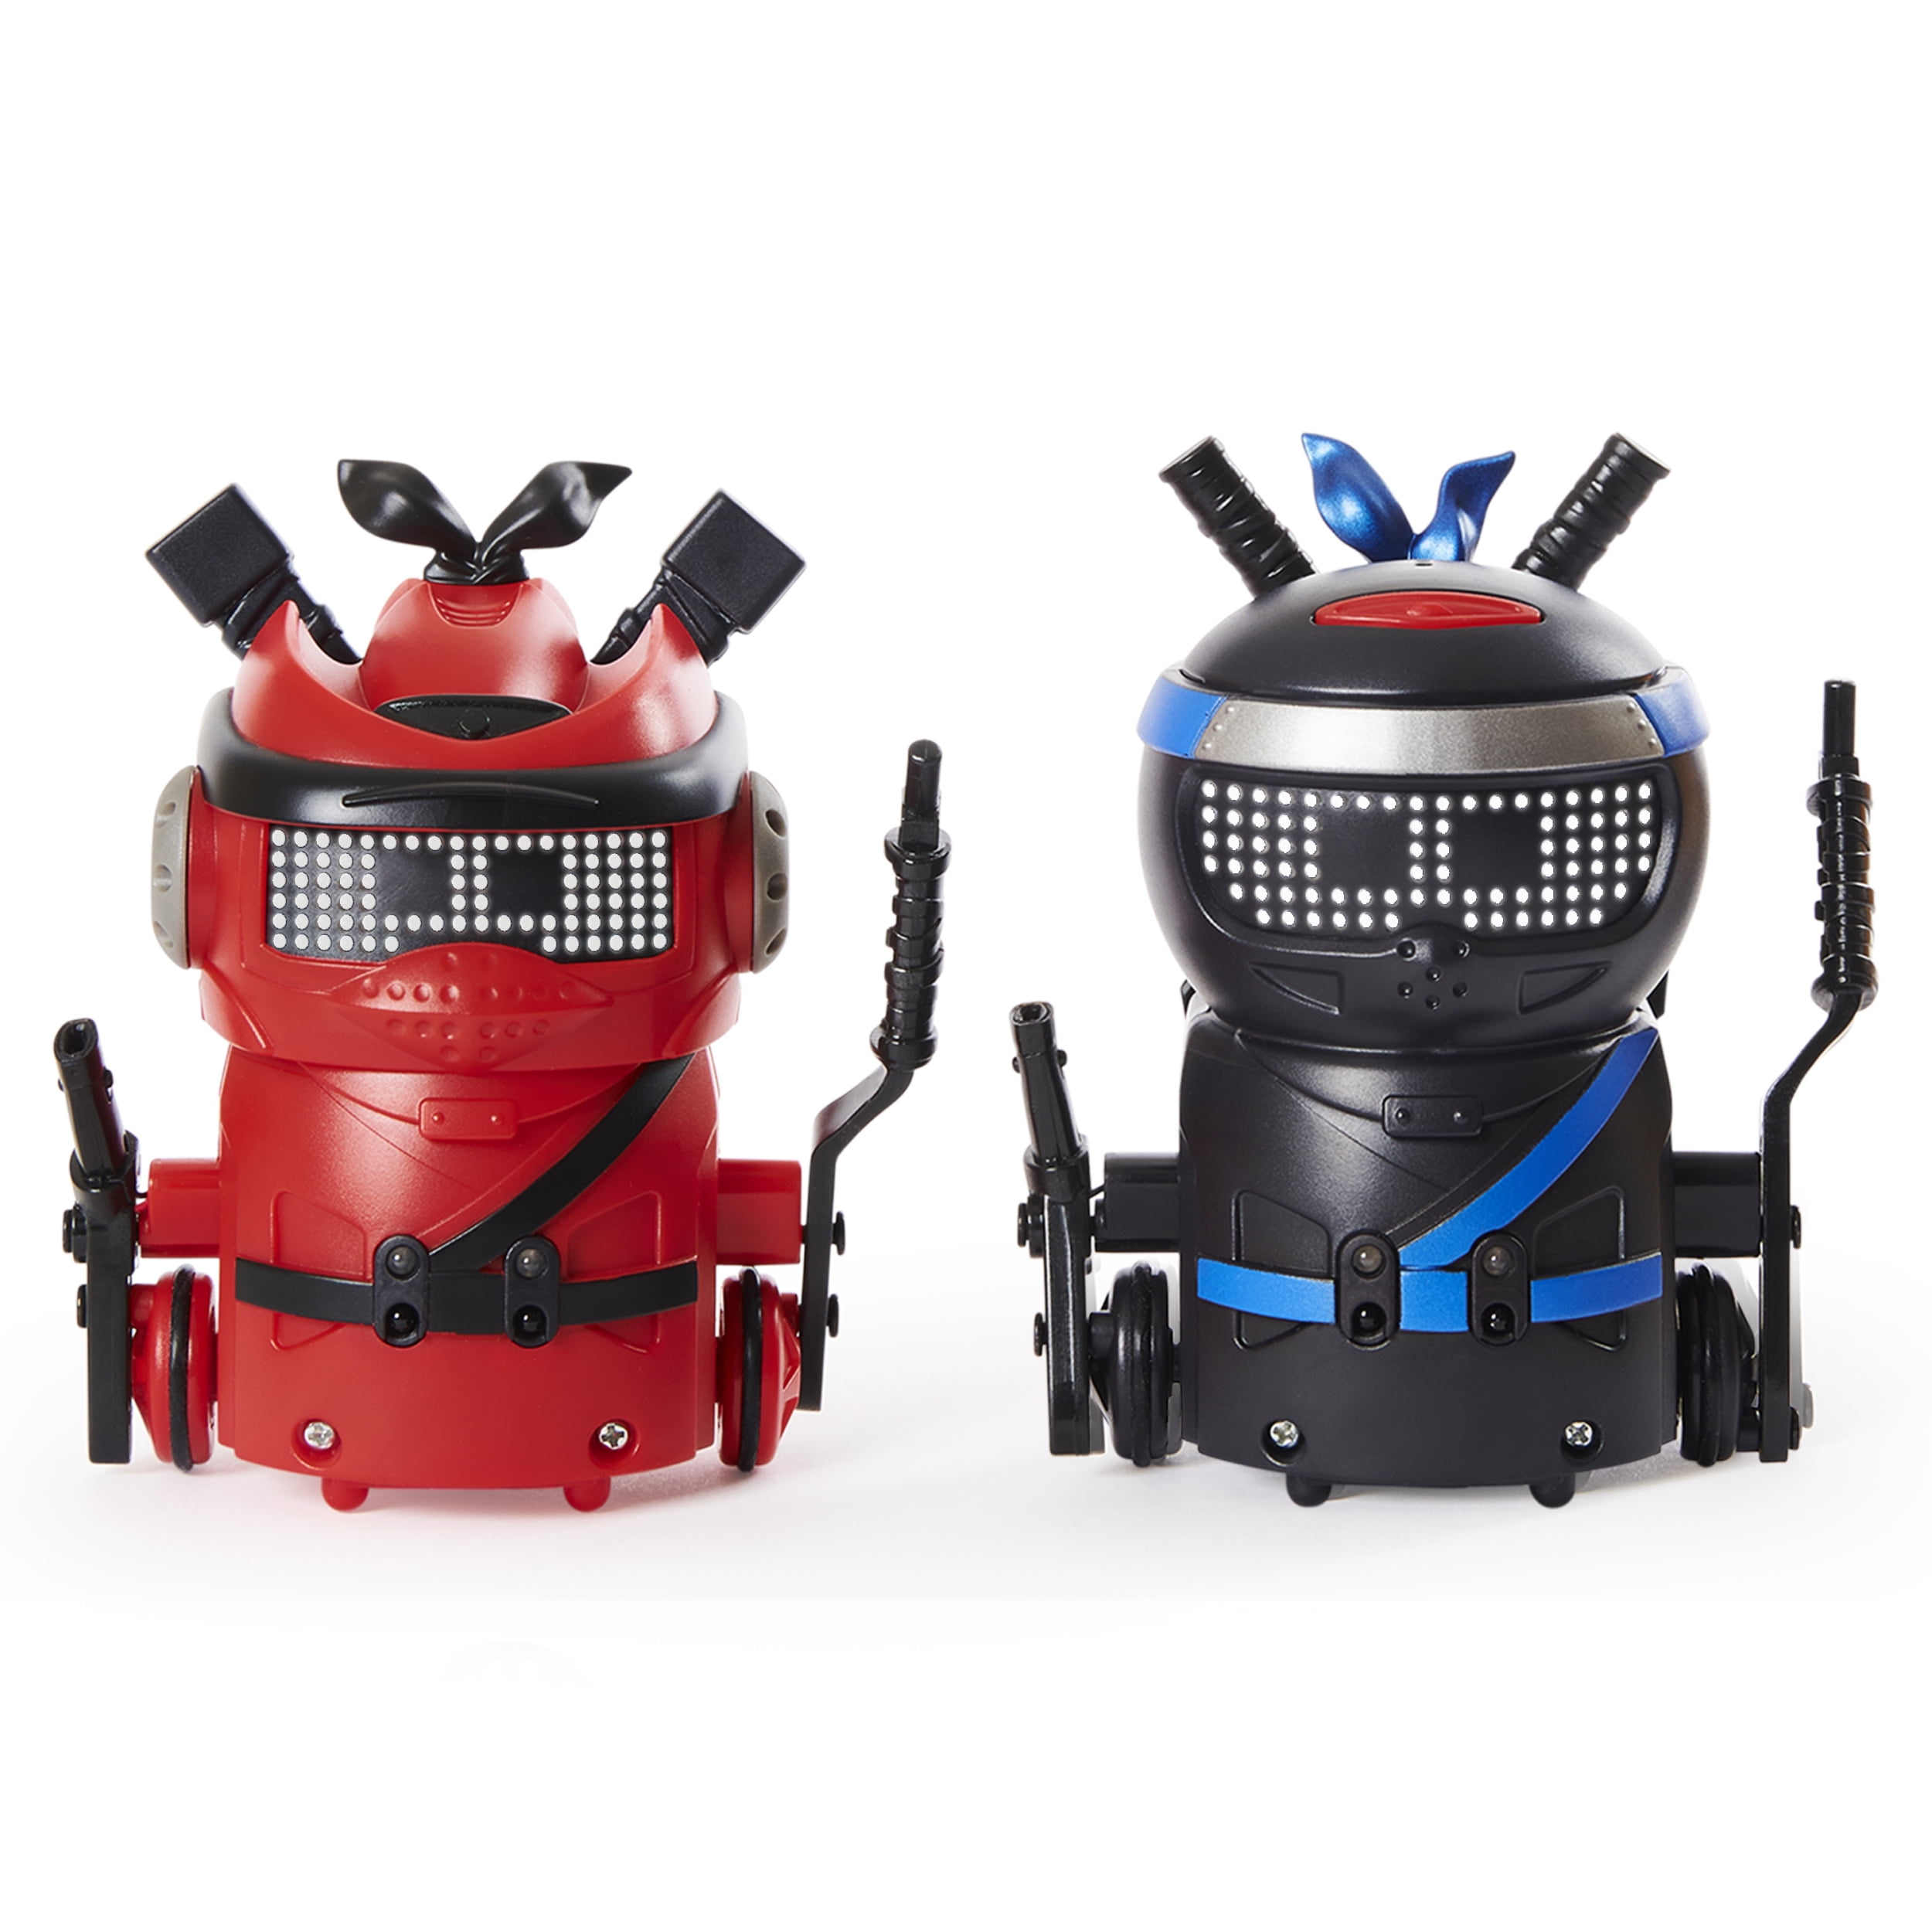 New 2020 Ninja Bots Hilarious Battling Robot with 3 Weapons and Trainer Blue 